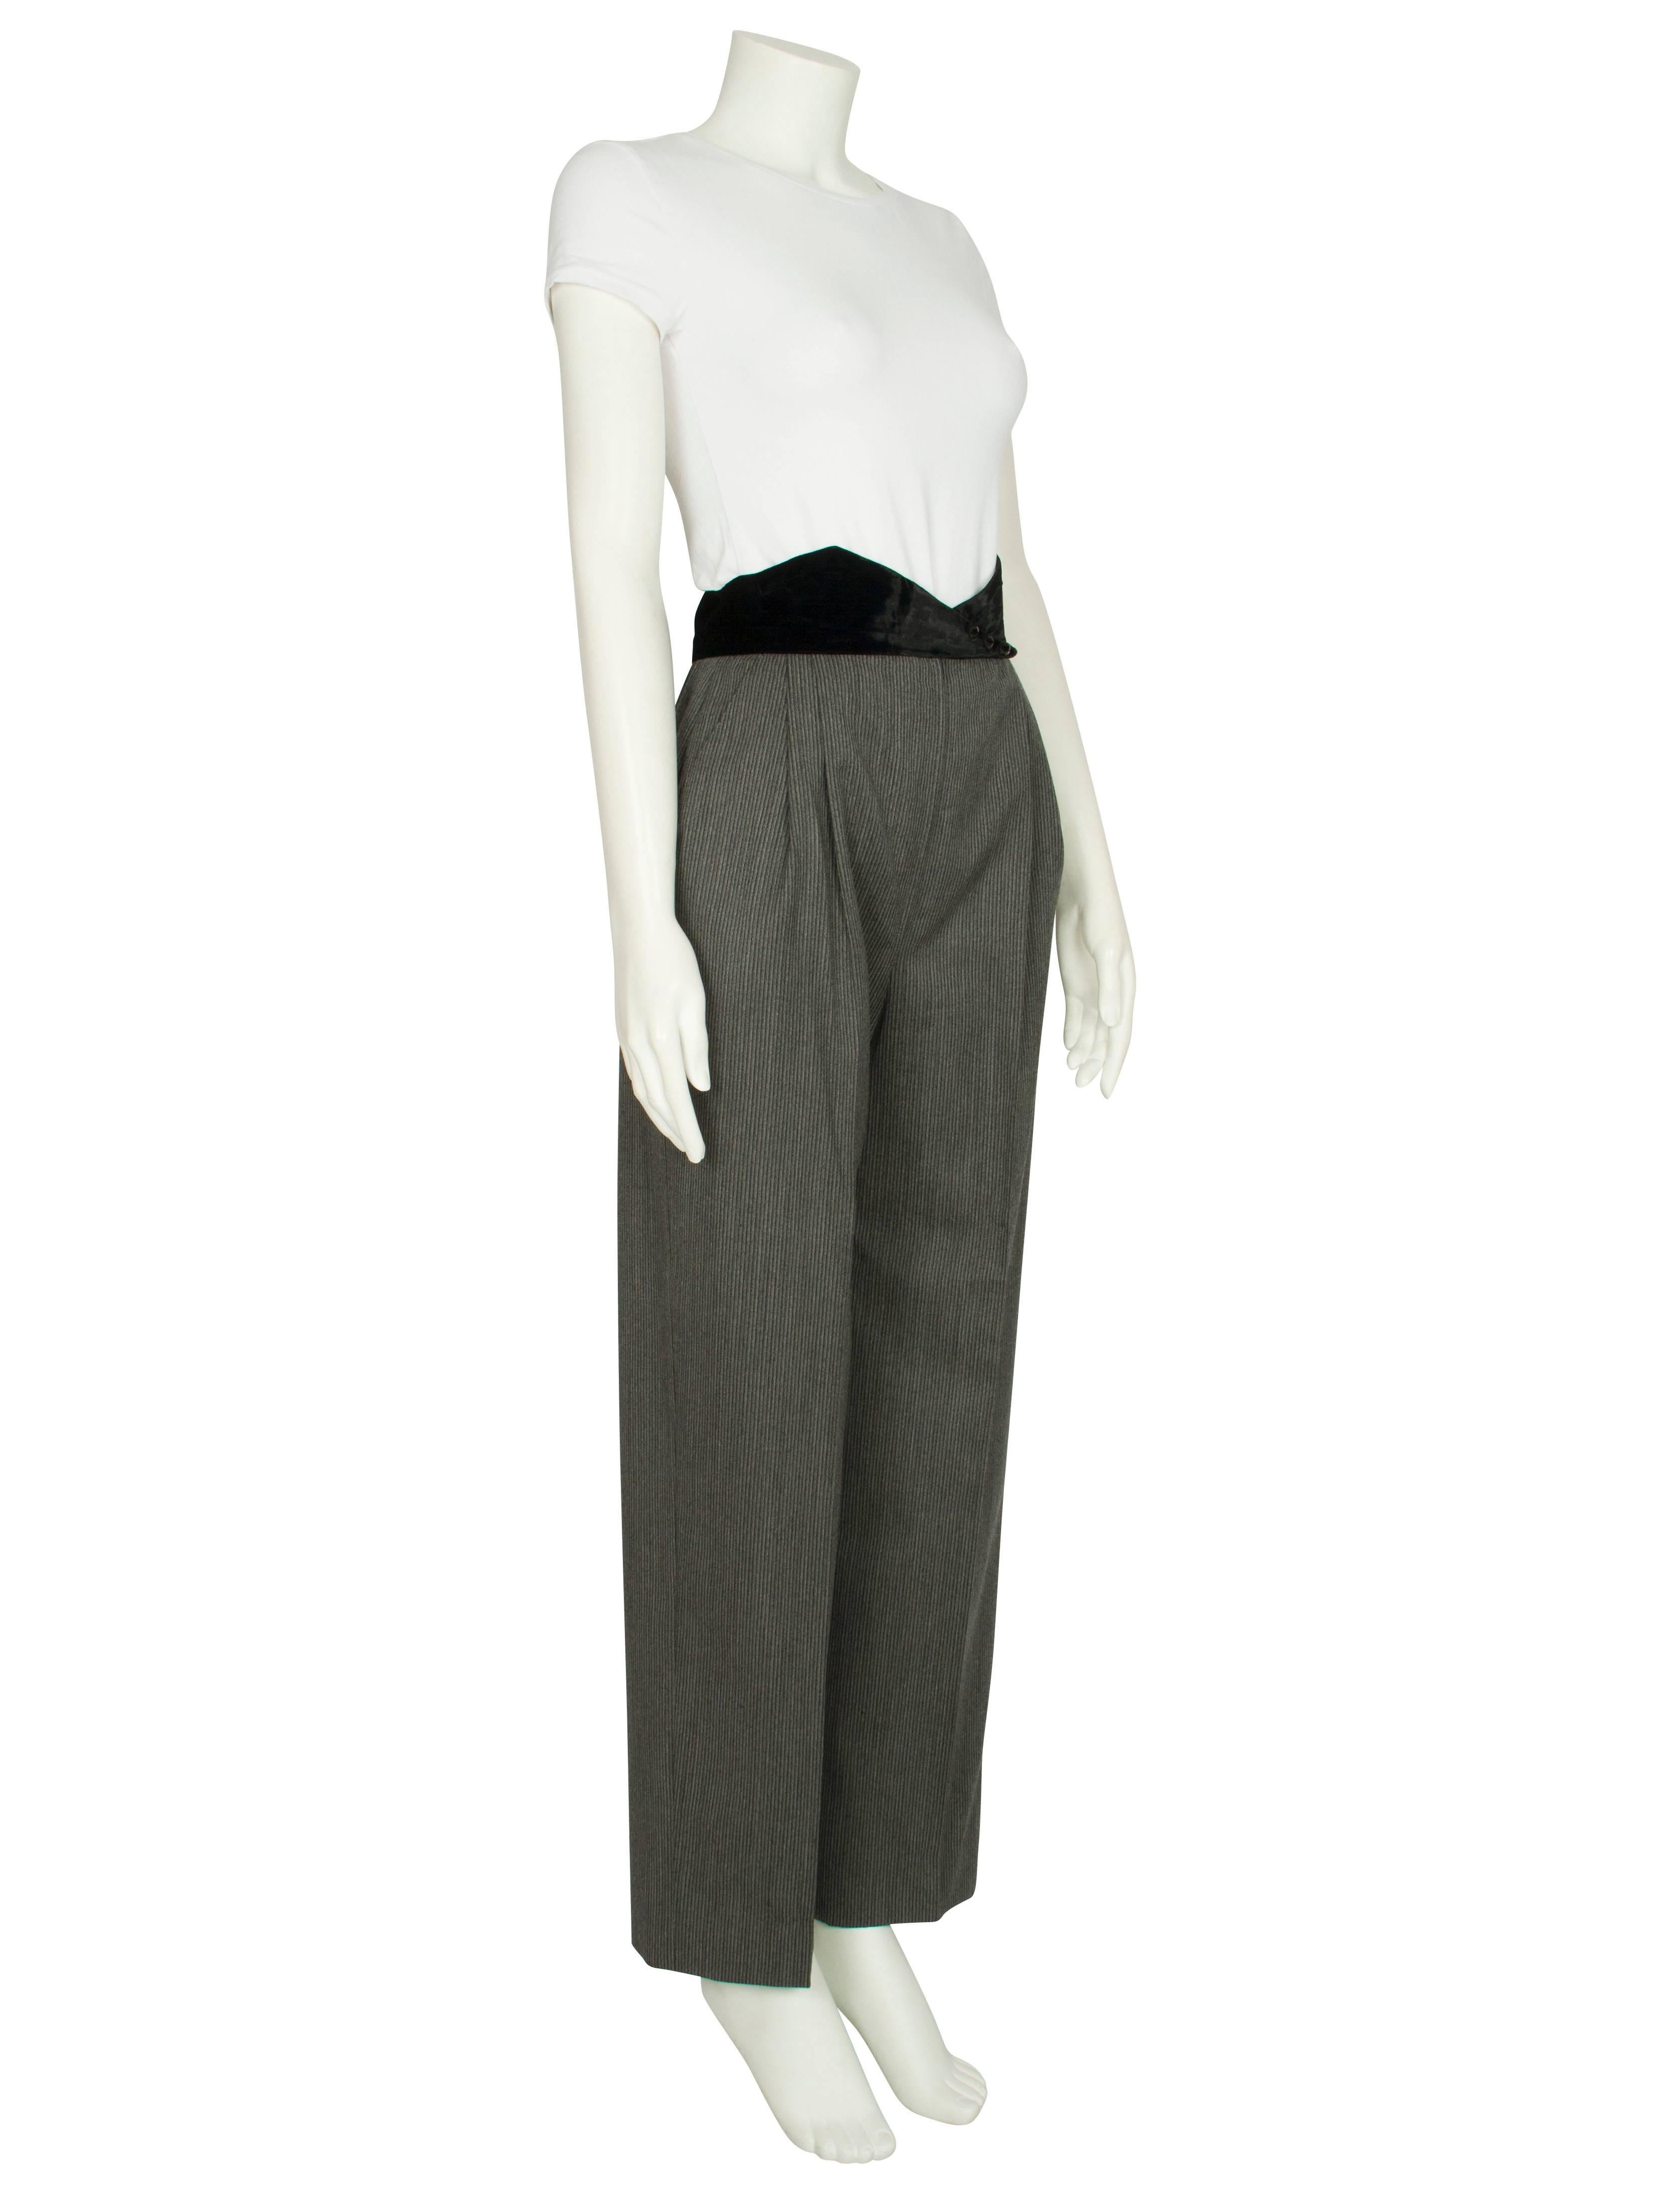 Women's 1980s Wool Pinstripe Tapered Trousers with Velvet Waistband For Sale